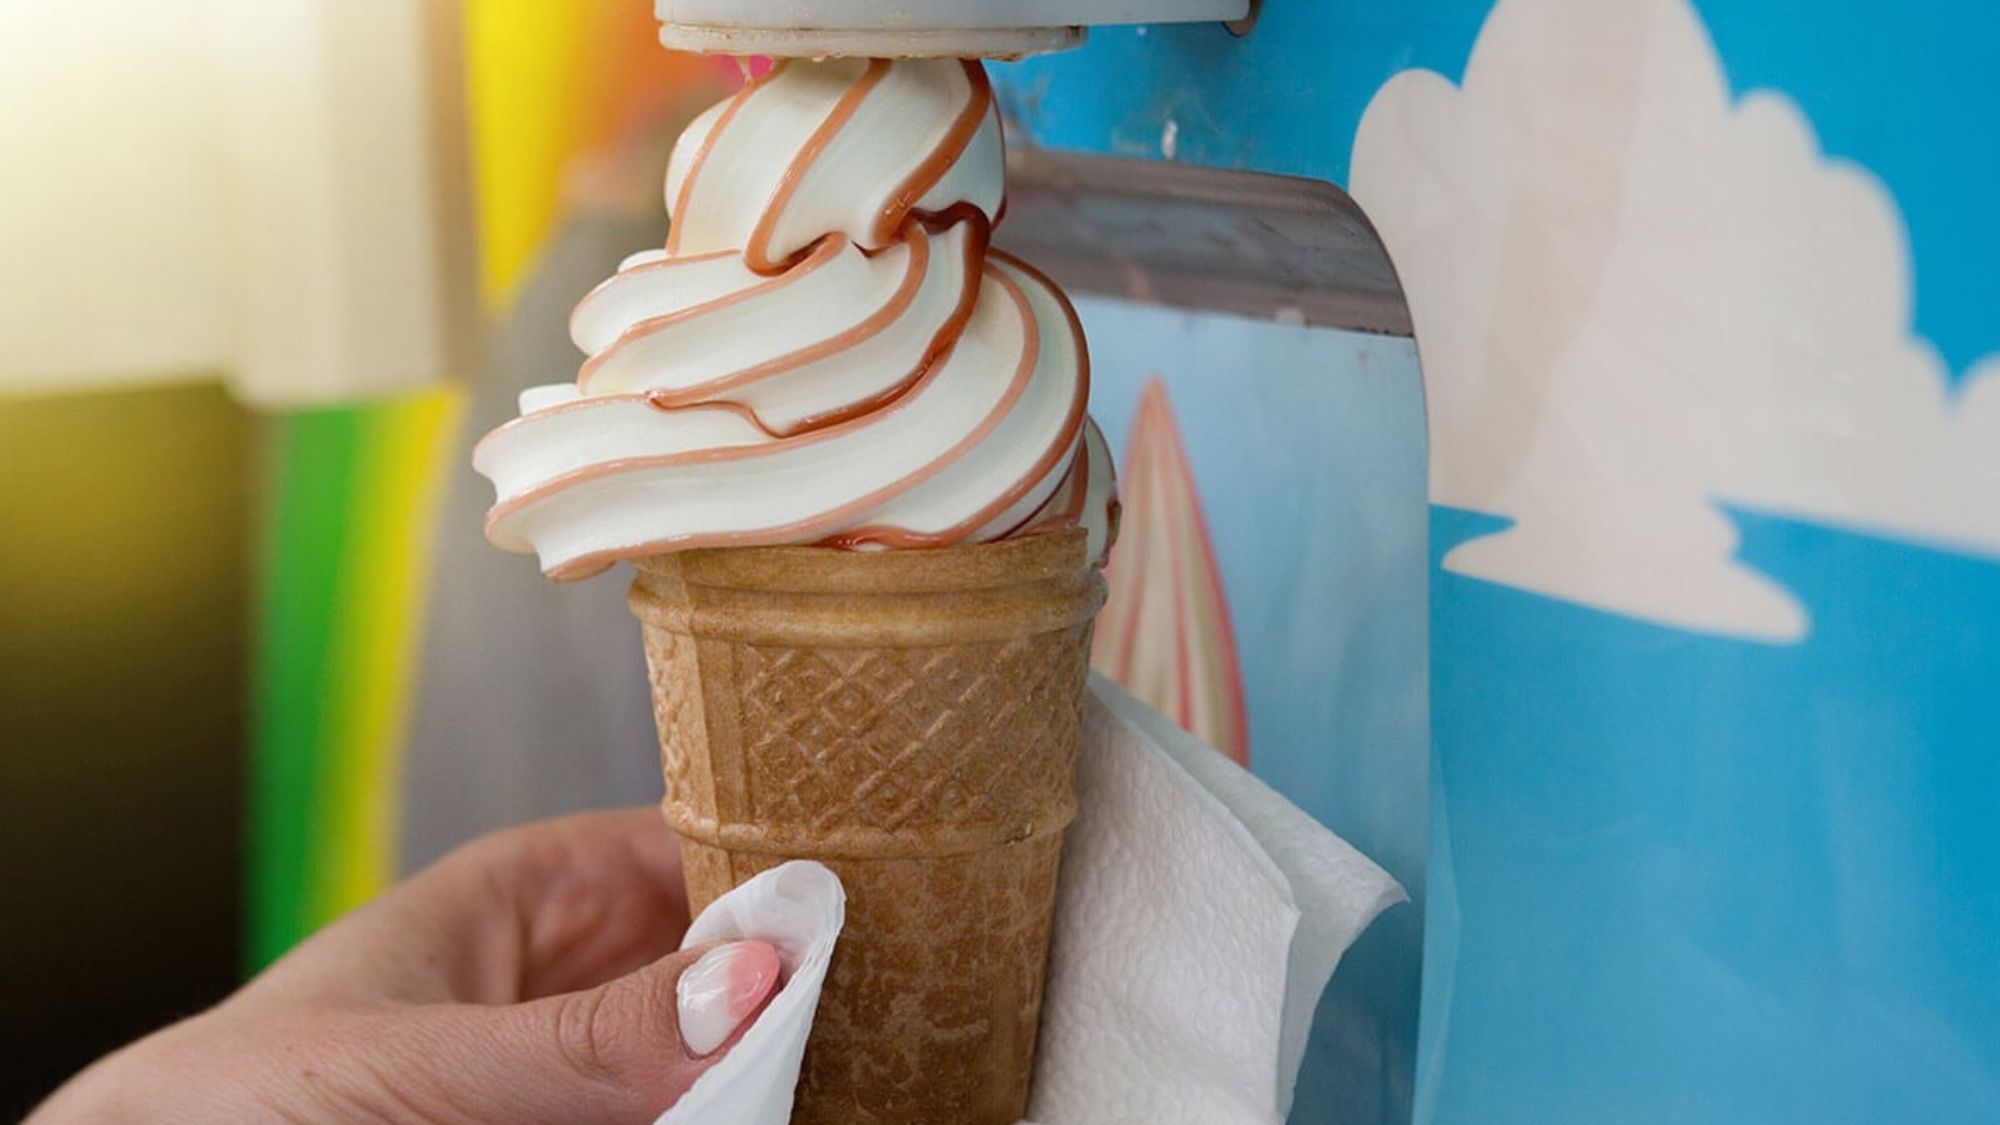 A person holds an ice cream cone with whipped cream, created using an ice cream machine